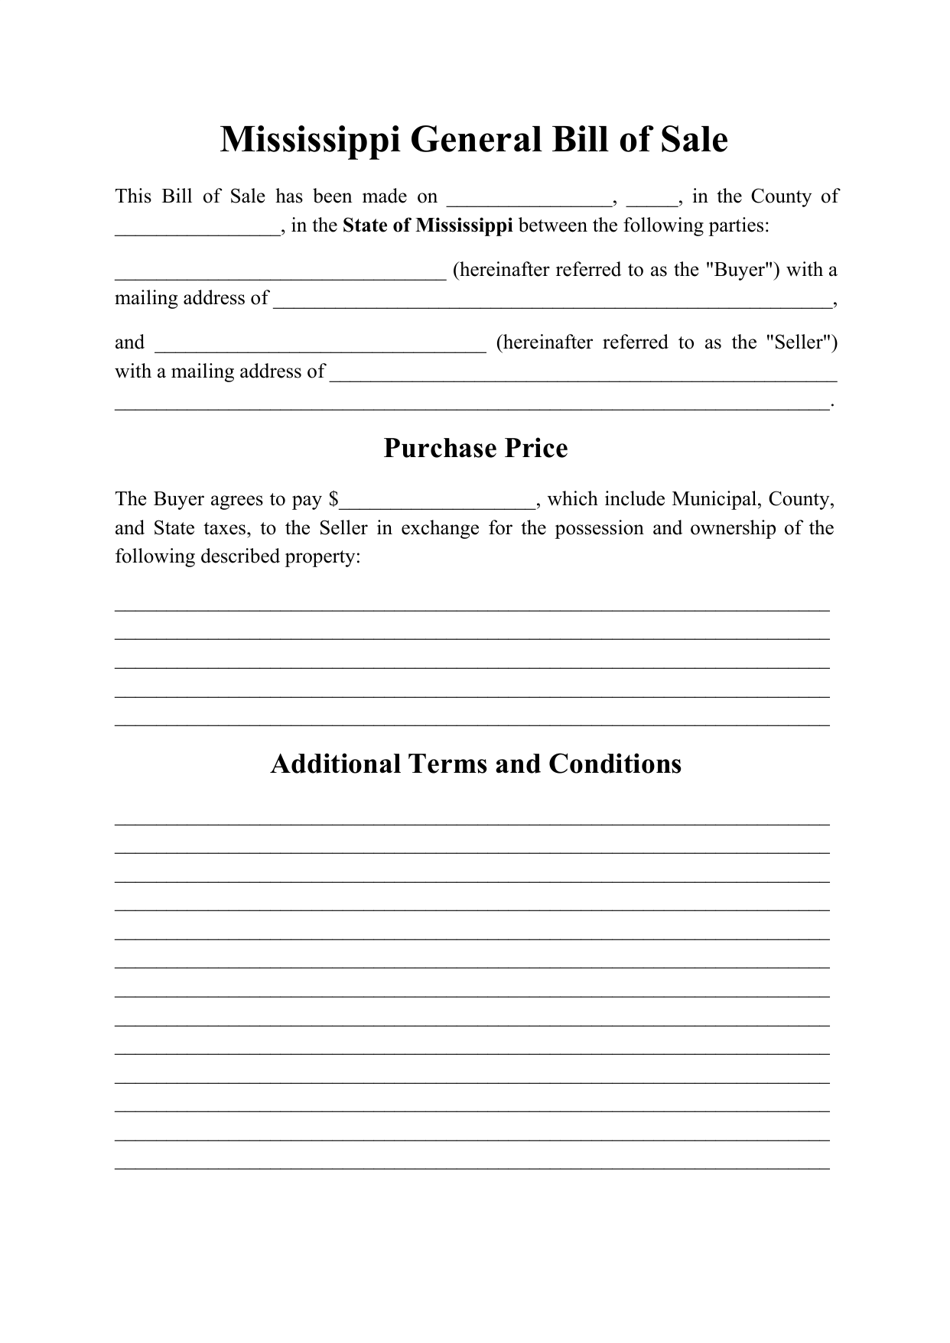 horse bill of sale template